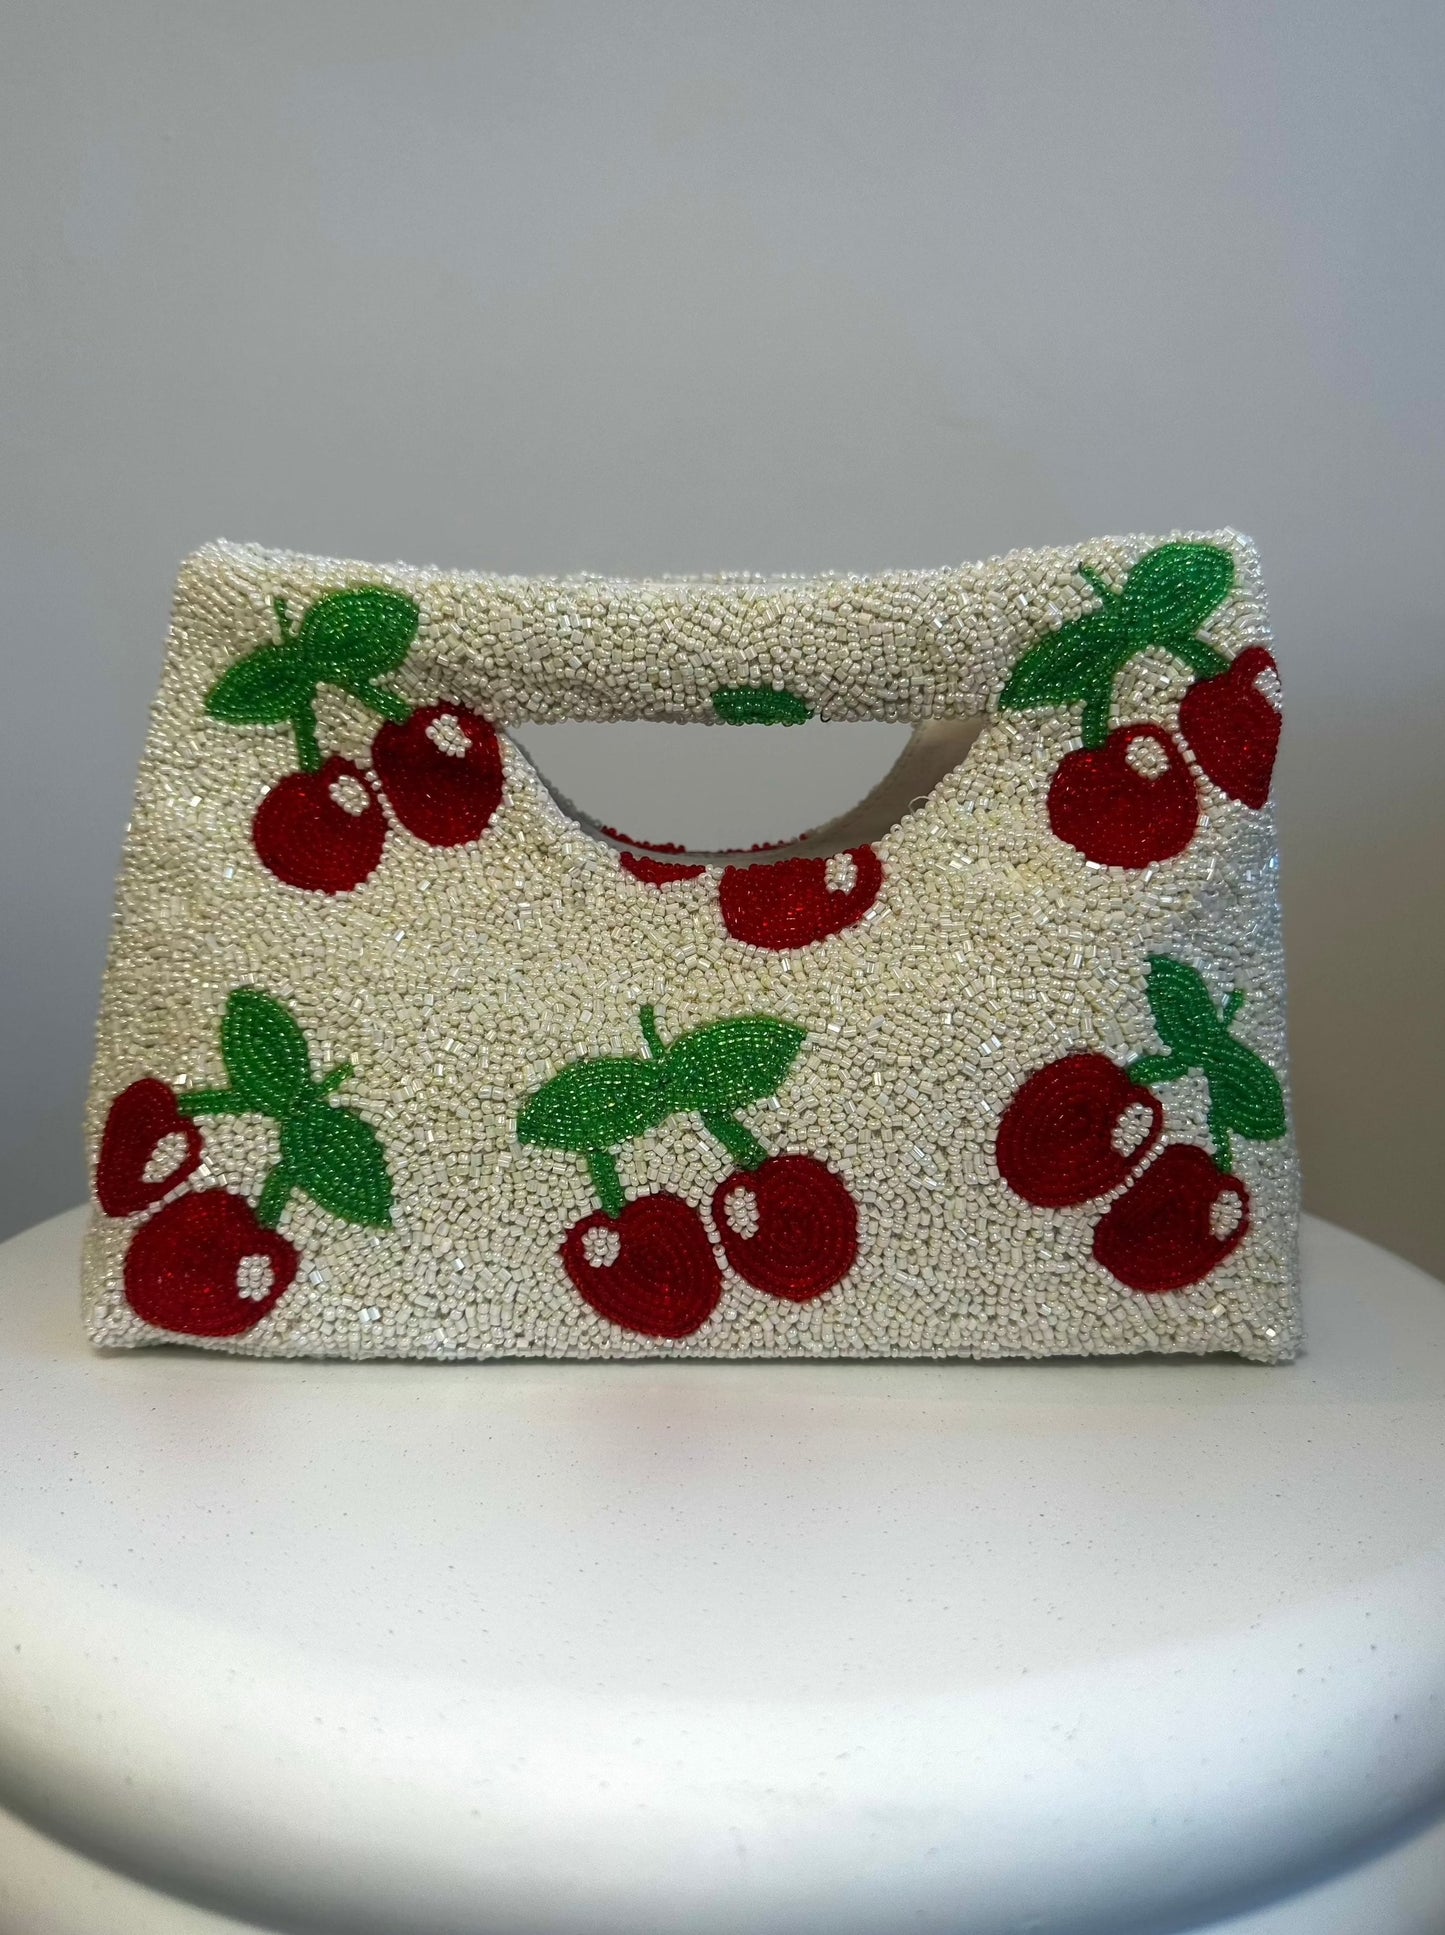 CUT OUT HANDLE CHERRIES